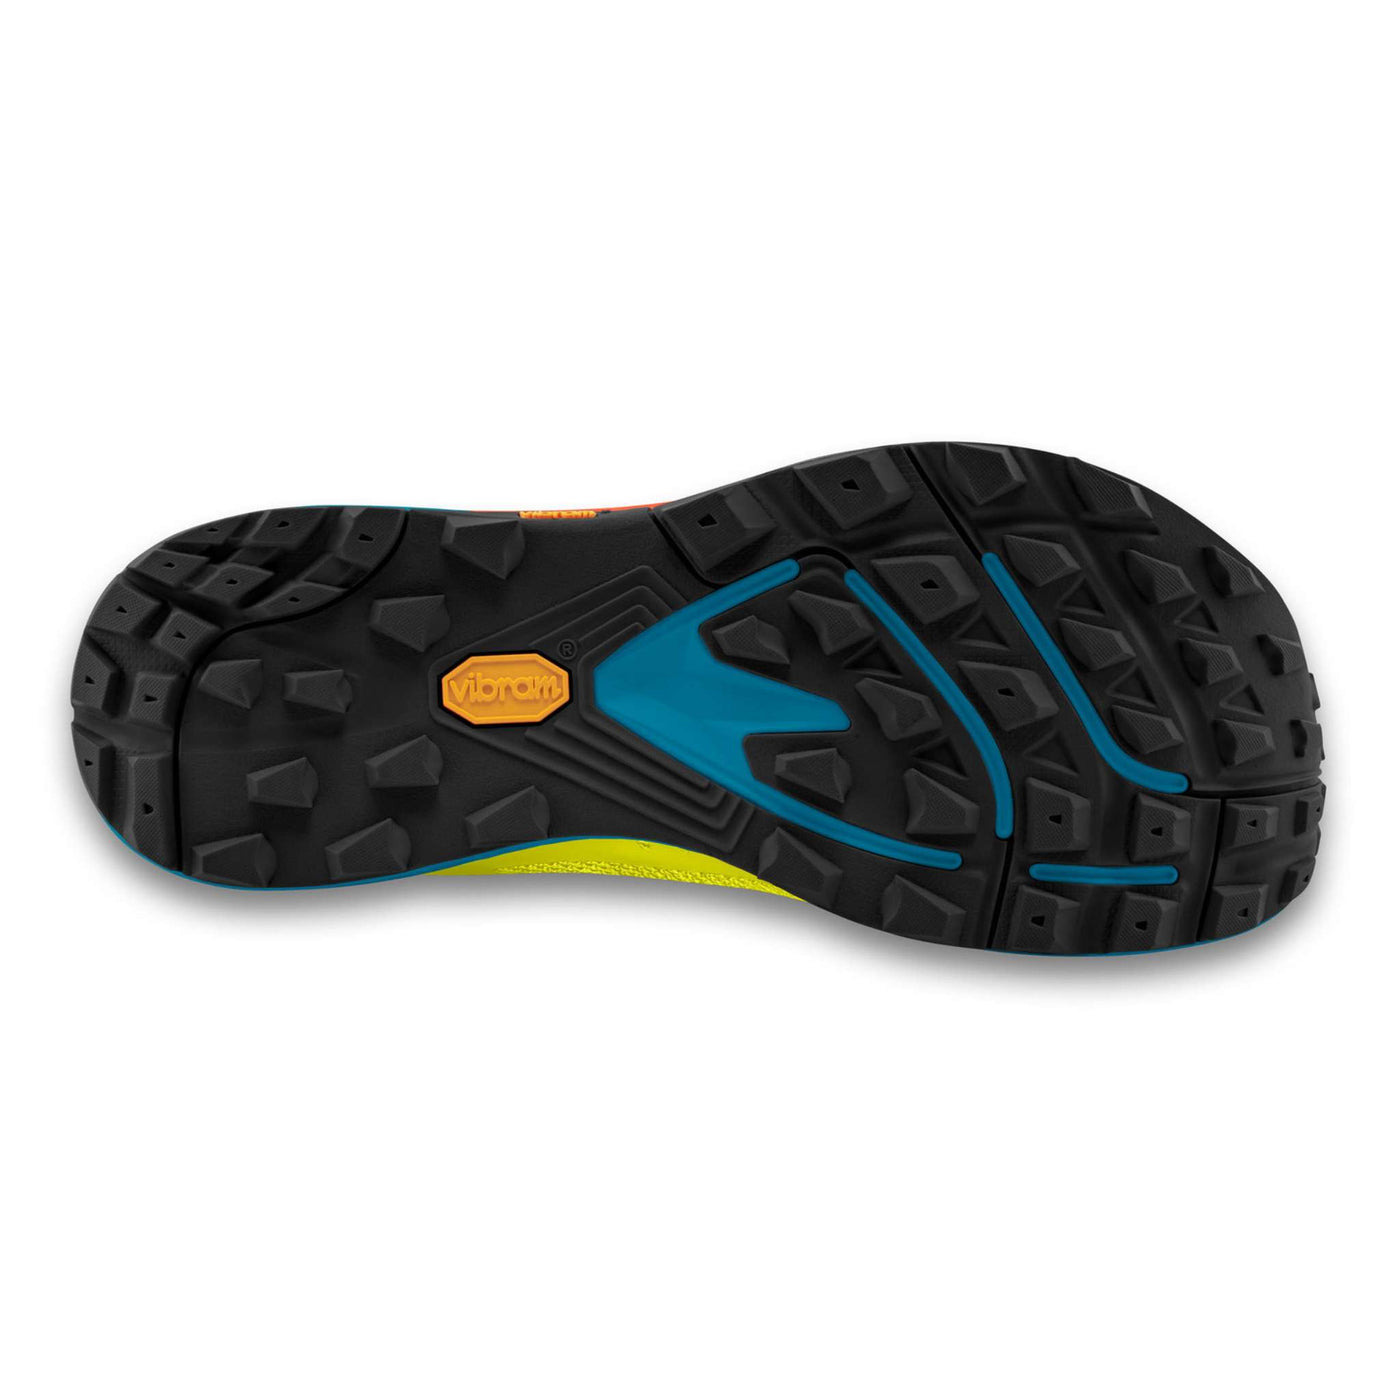 Topo MT 4 - Mens | Men's Trail Running Shoes | Further Faster Christchurch NZ | #electric-orange